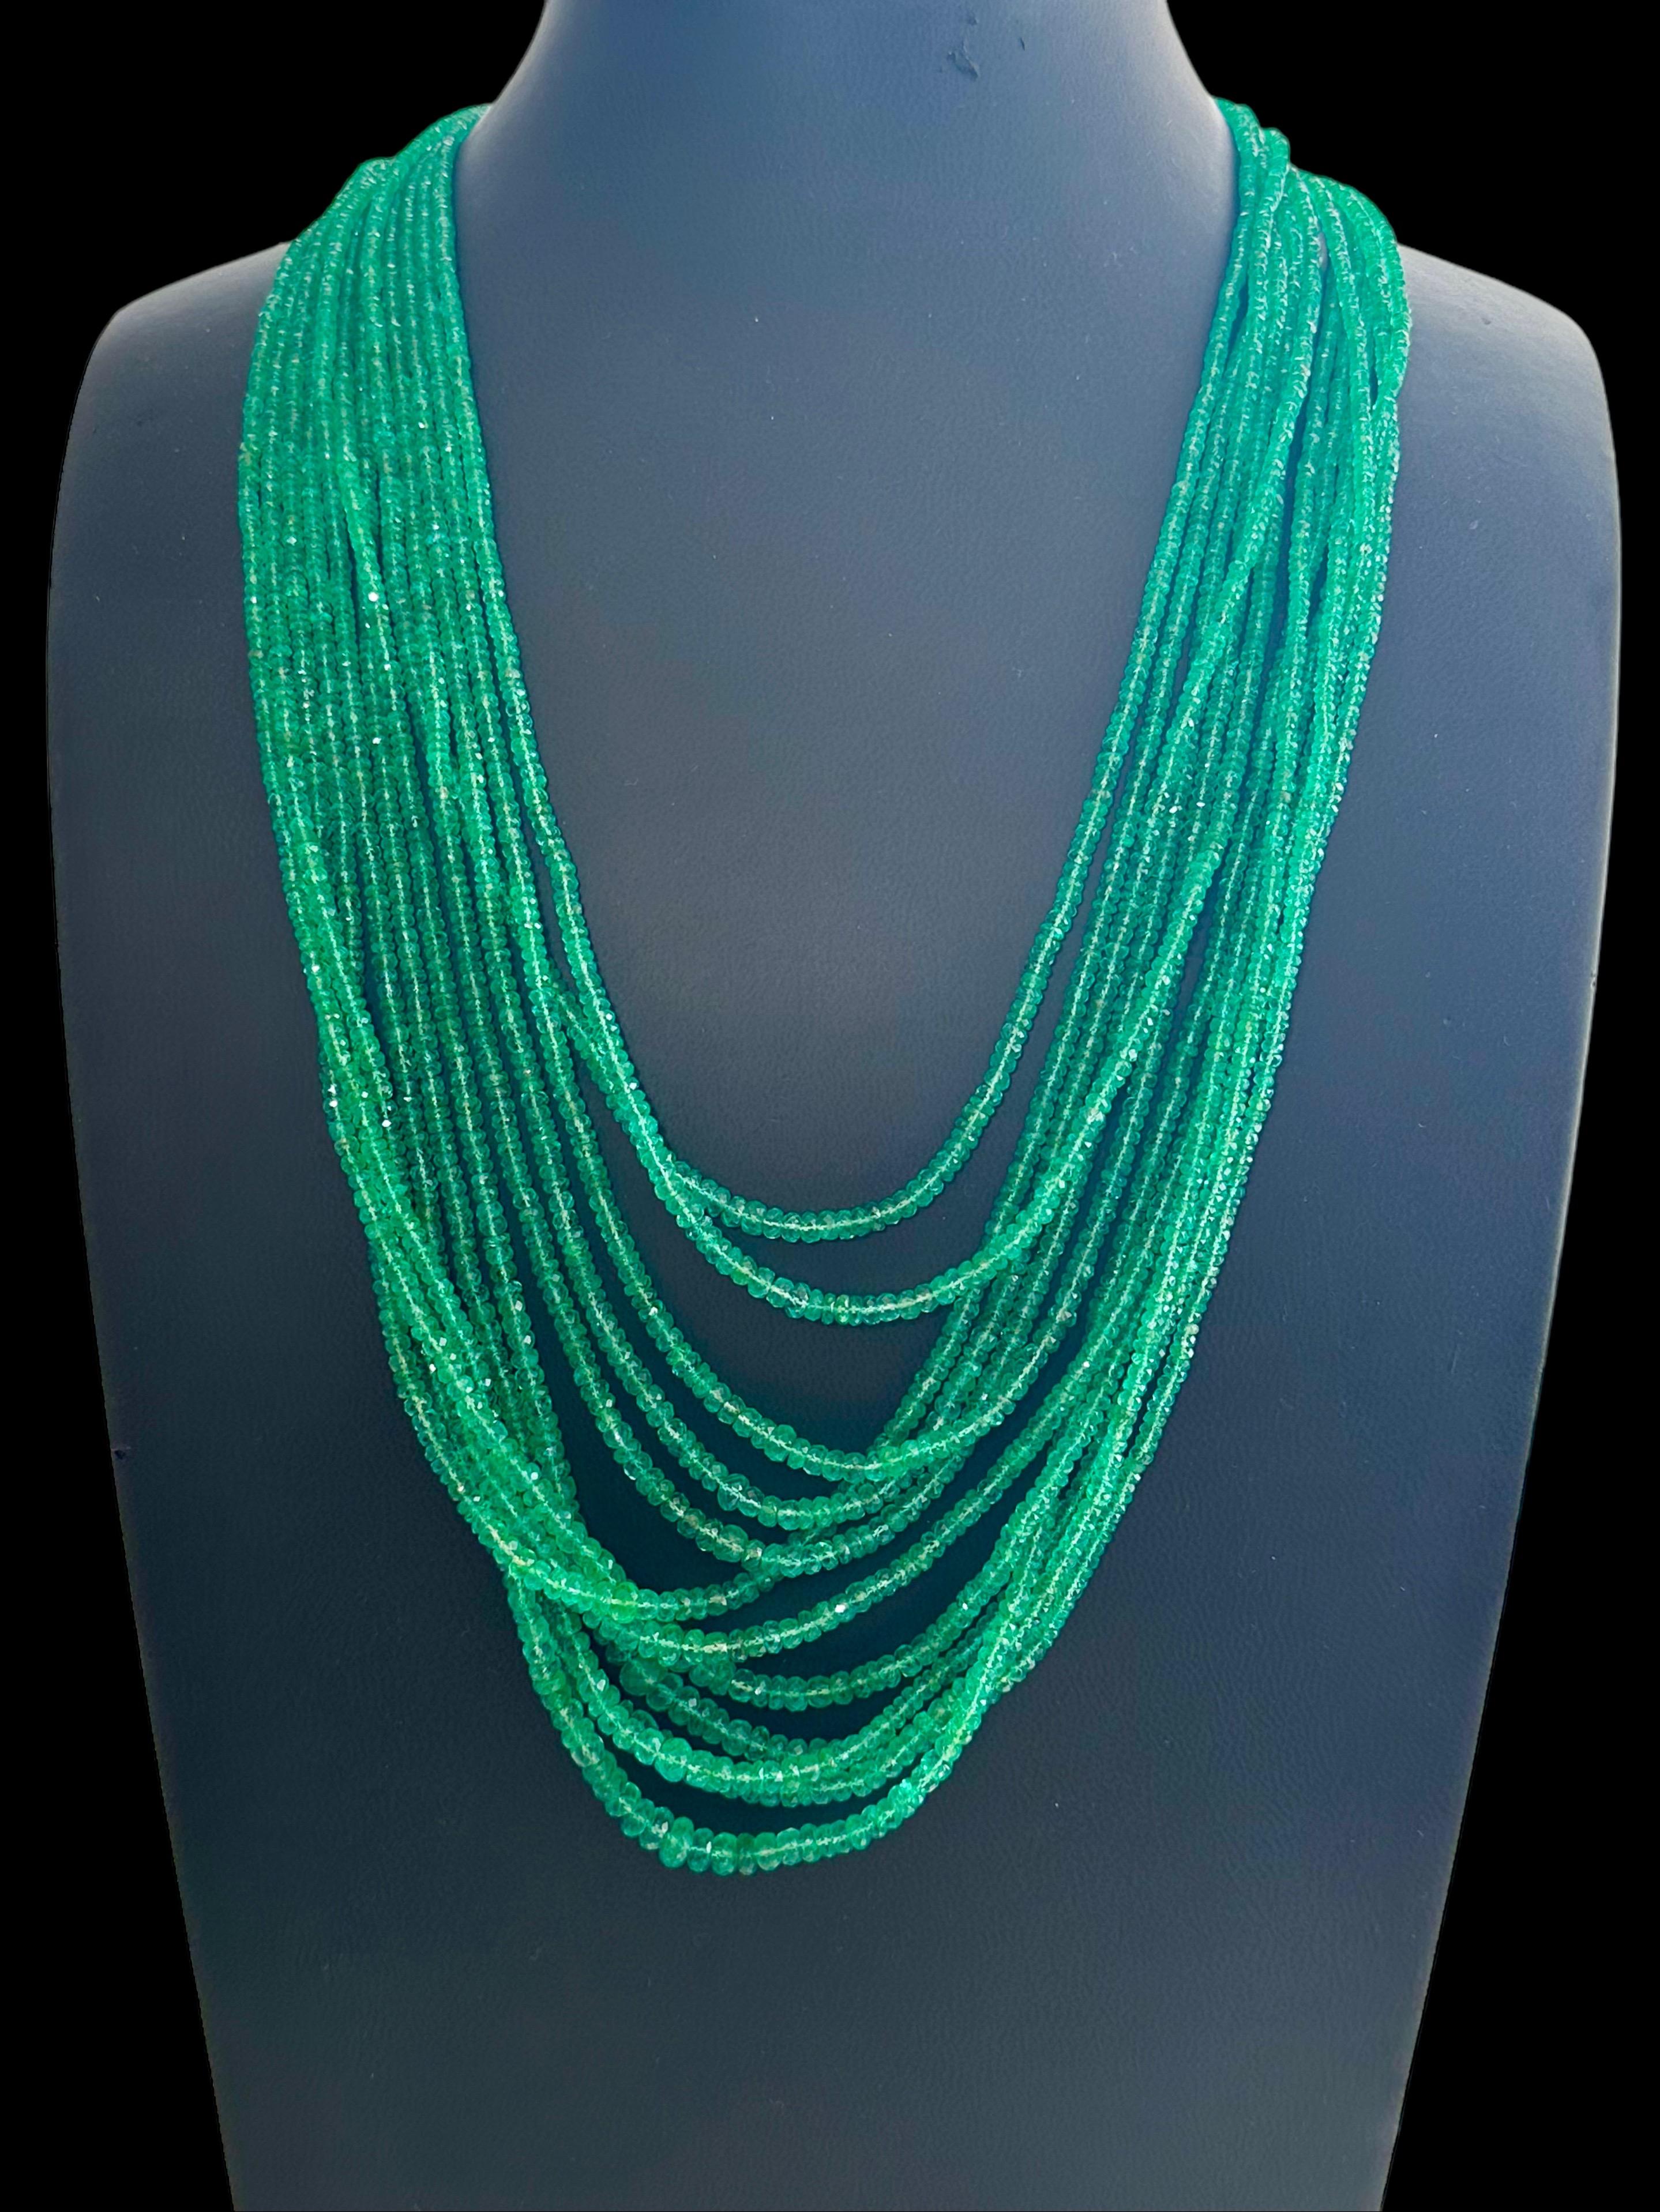 Multi Strand Necklace 450 Ct Columbia Faceted Emeralds Cgl Certified & Amethyst  For Sale 2